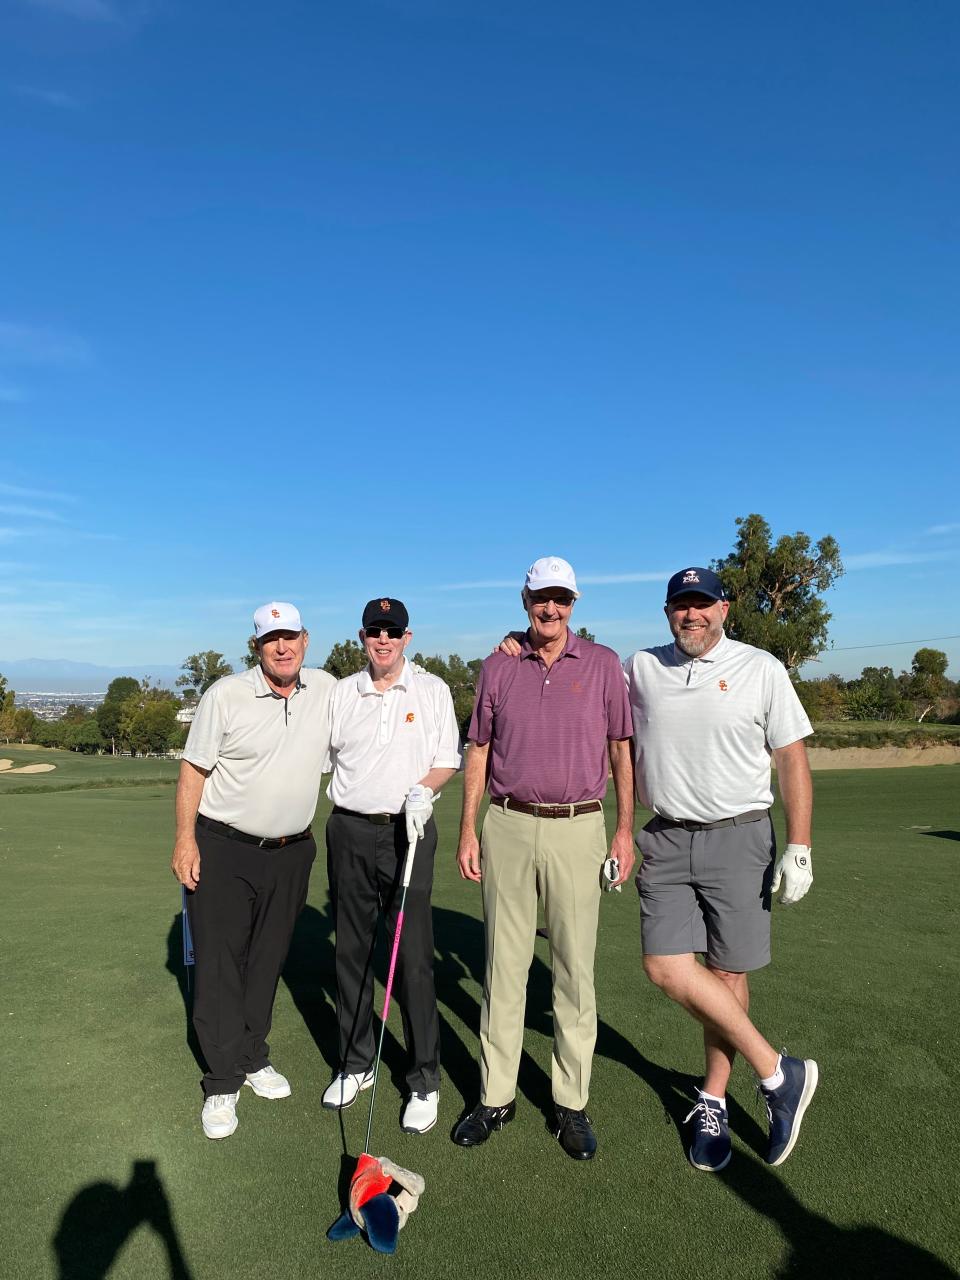 Dick Robinson, Bill Poland, Dave McLeod and Wes Poland get ready for a round of golf.